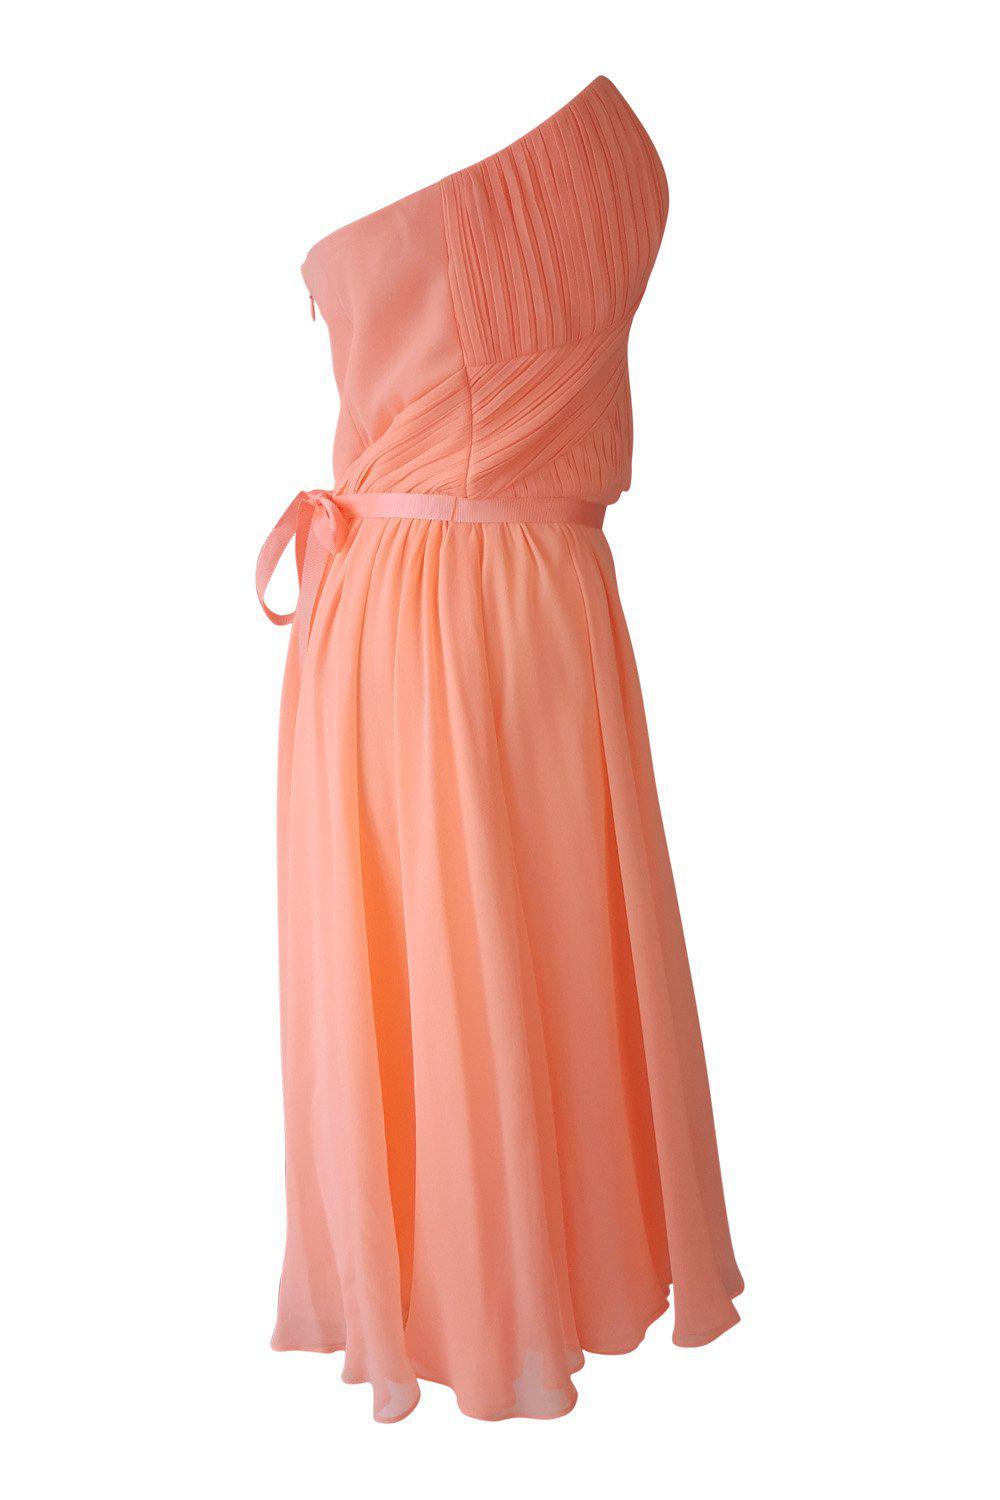 OASIS Neon Peach Pleated Bustier Fit and Flare Dress (UK 12)-Oasis-The Freperie